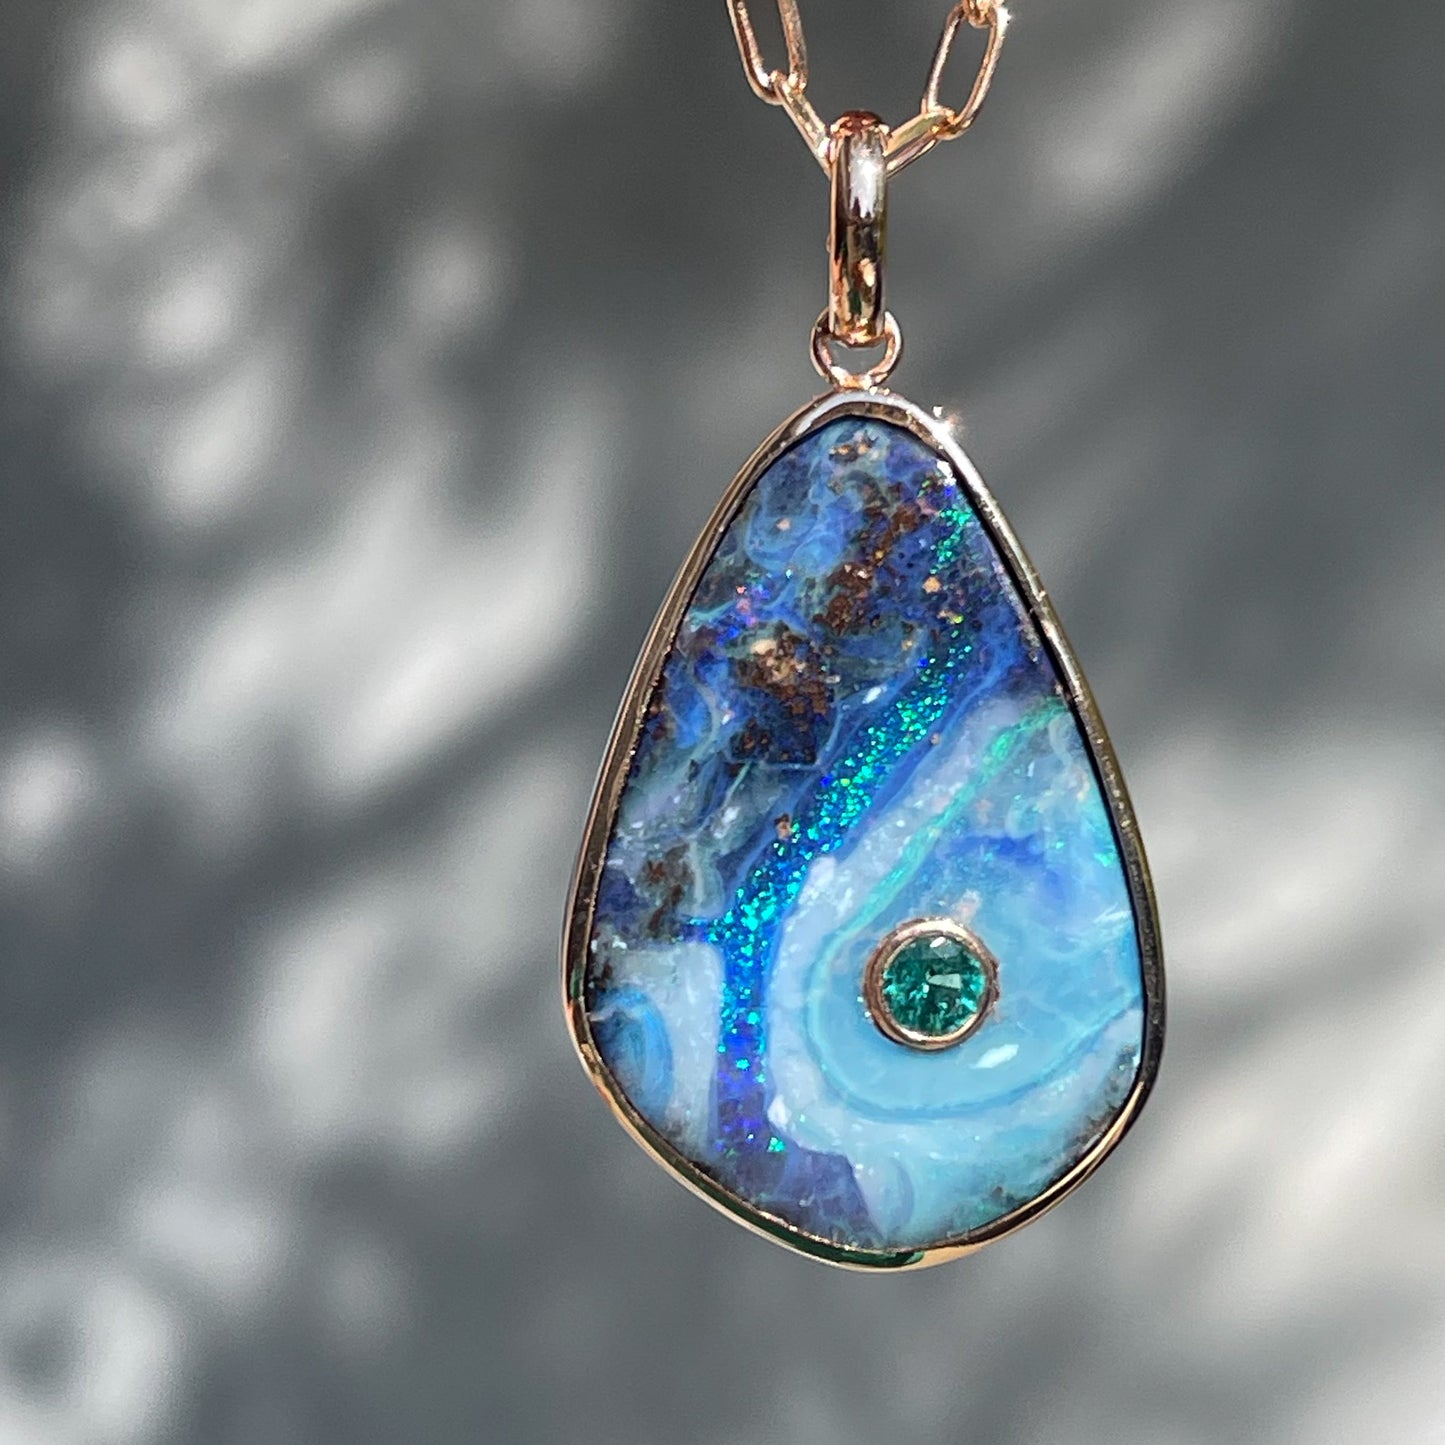 An Australian Opal Necklace by NIXIN Jewelry hanging in front of a grey backdrop. Made in rose gold with a bezel setting and hanging from a paperclip chain.